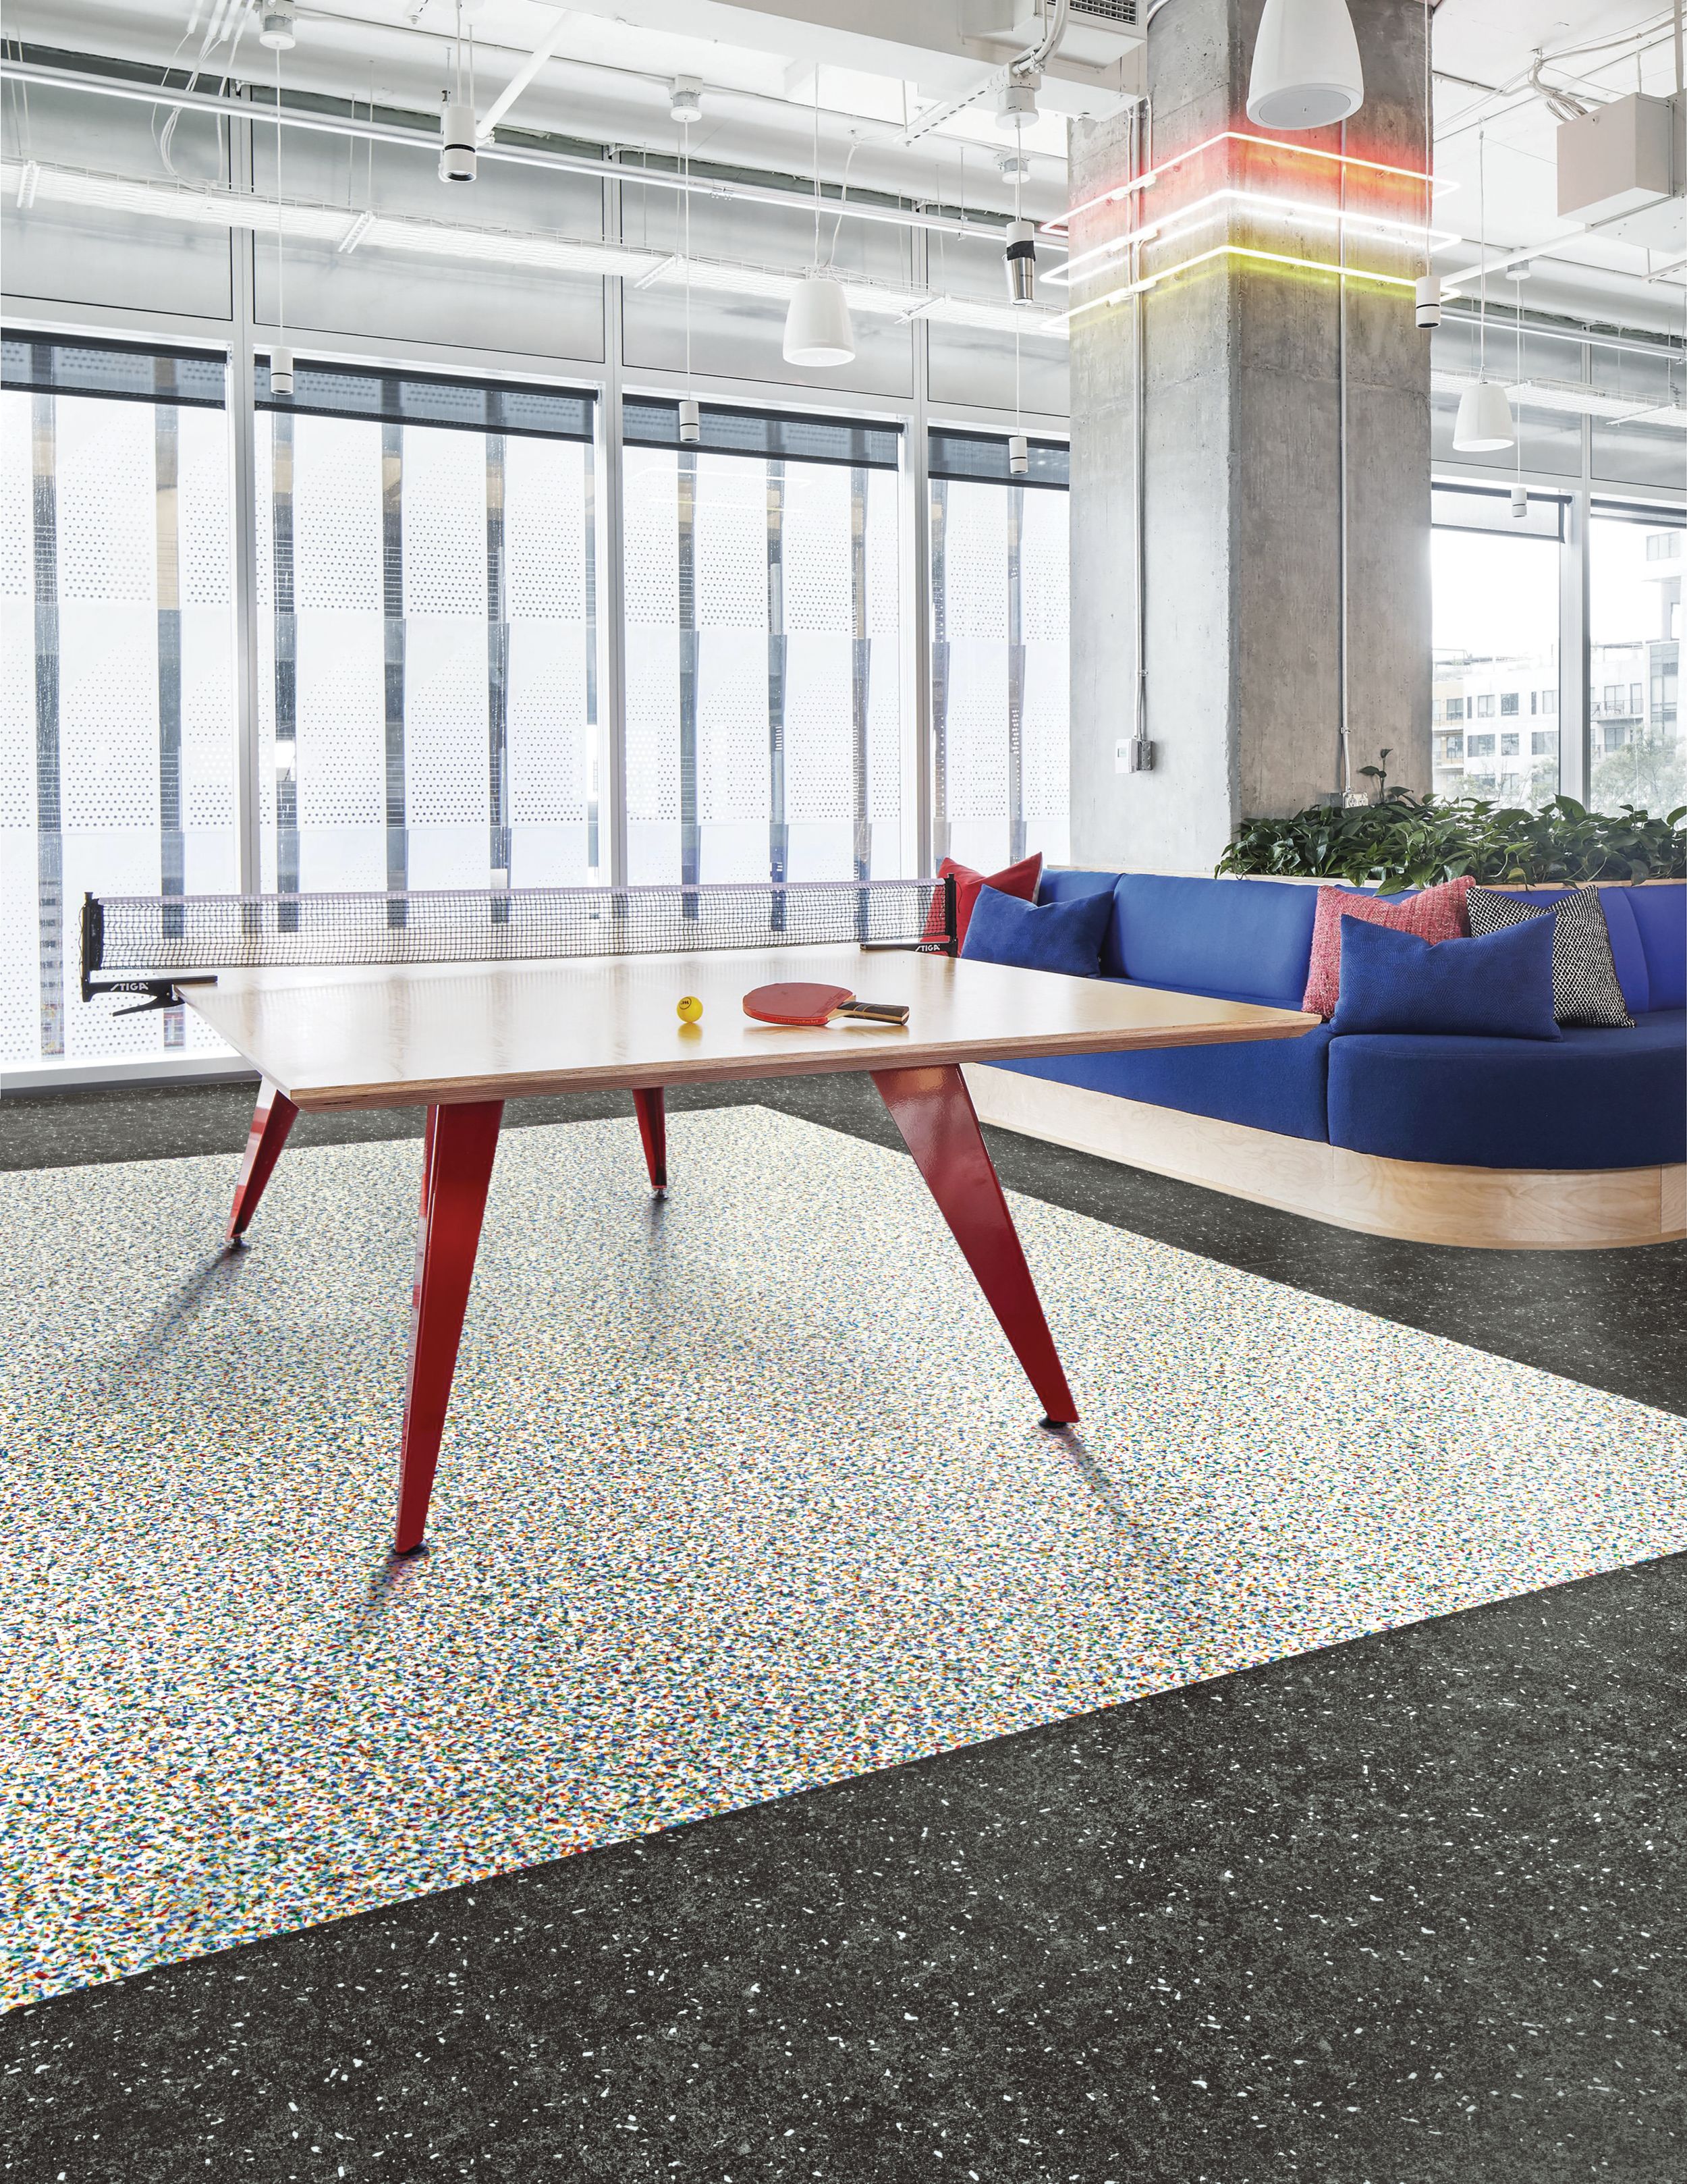 Interface Walk on By, Polychrome and Walk the Aisle LVT in a lobby space número de imagen 2